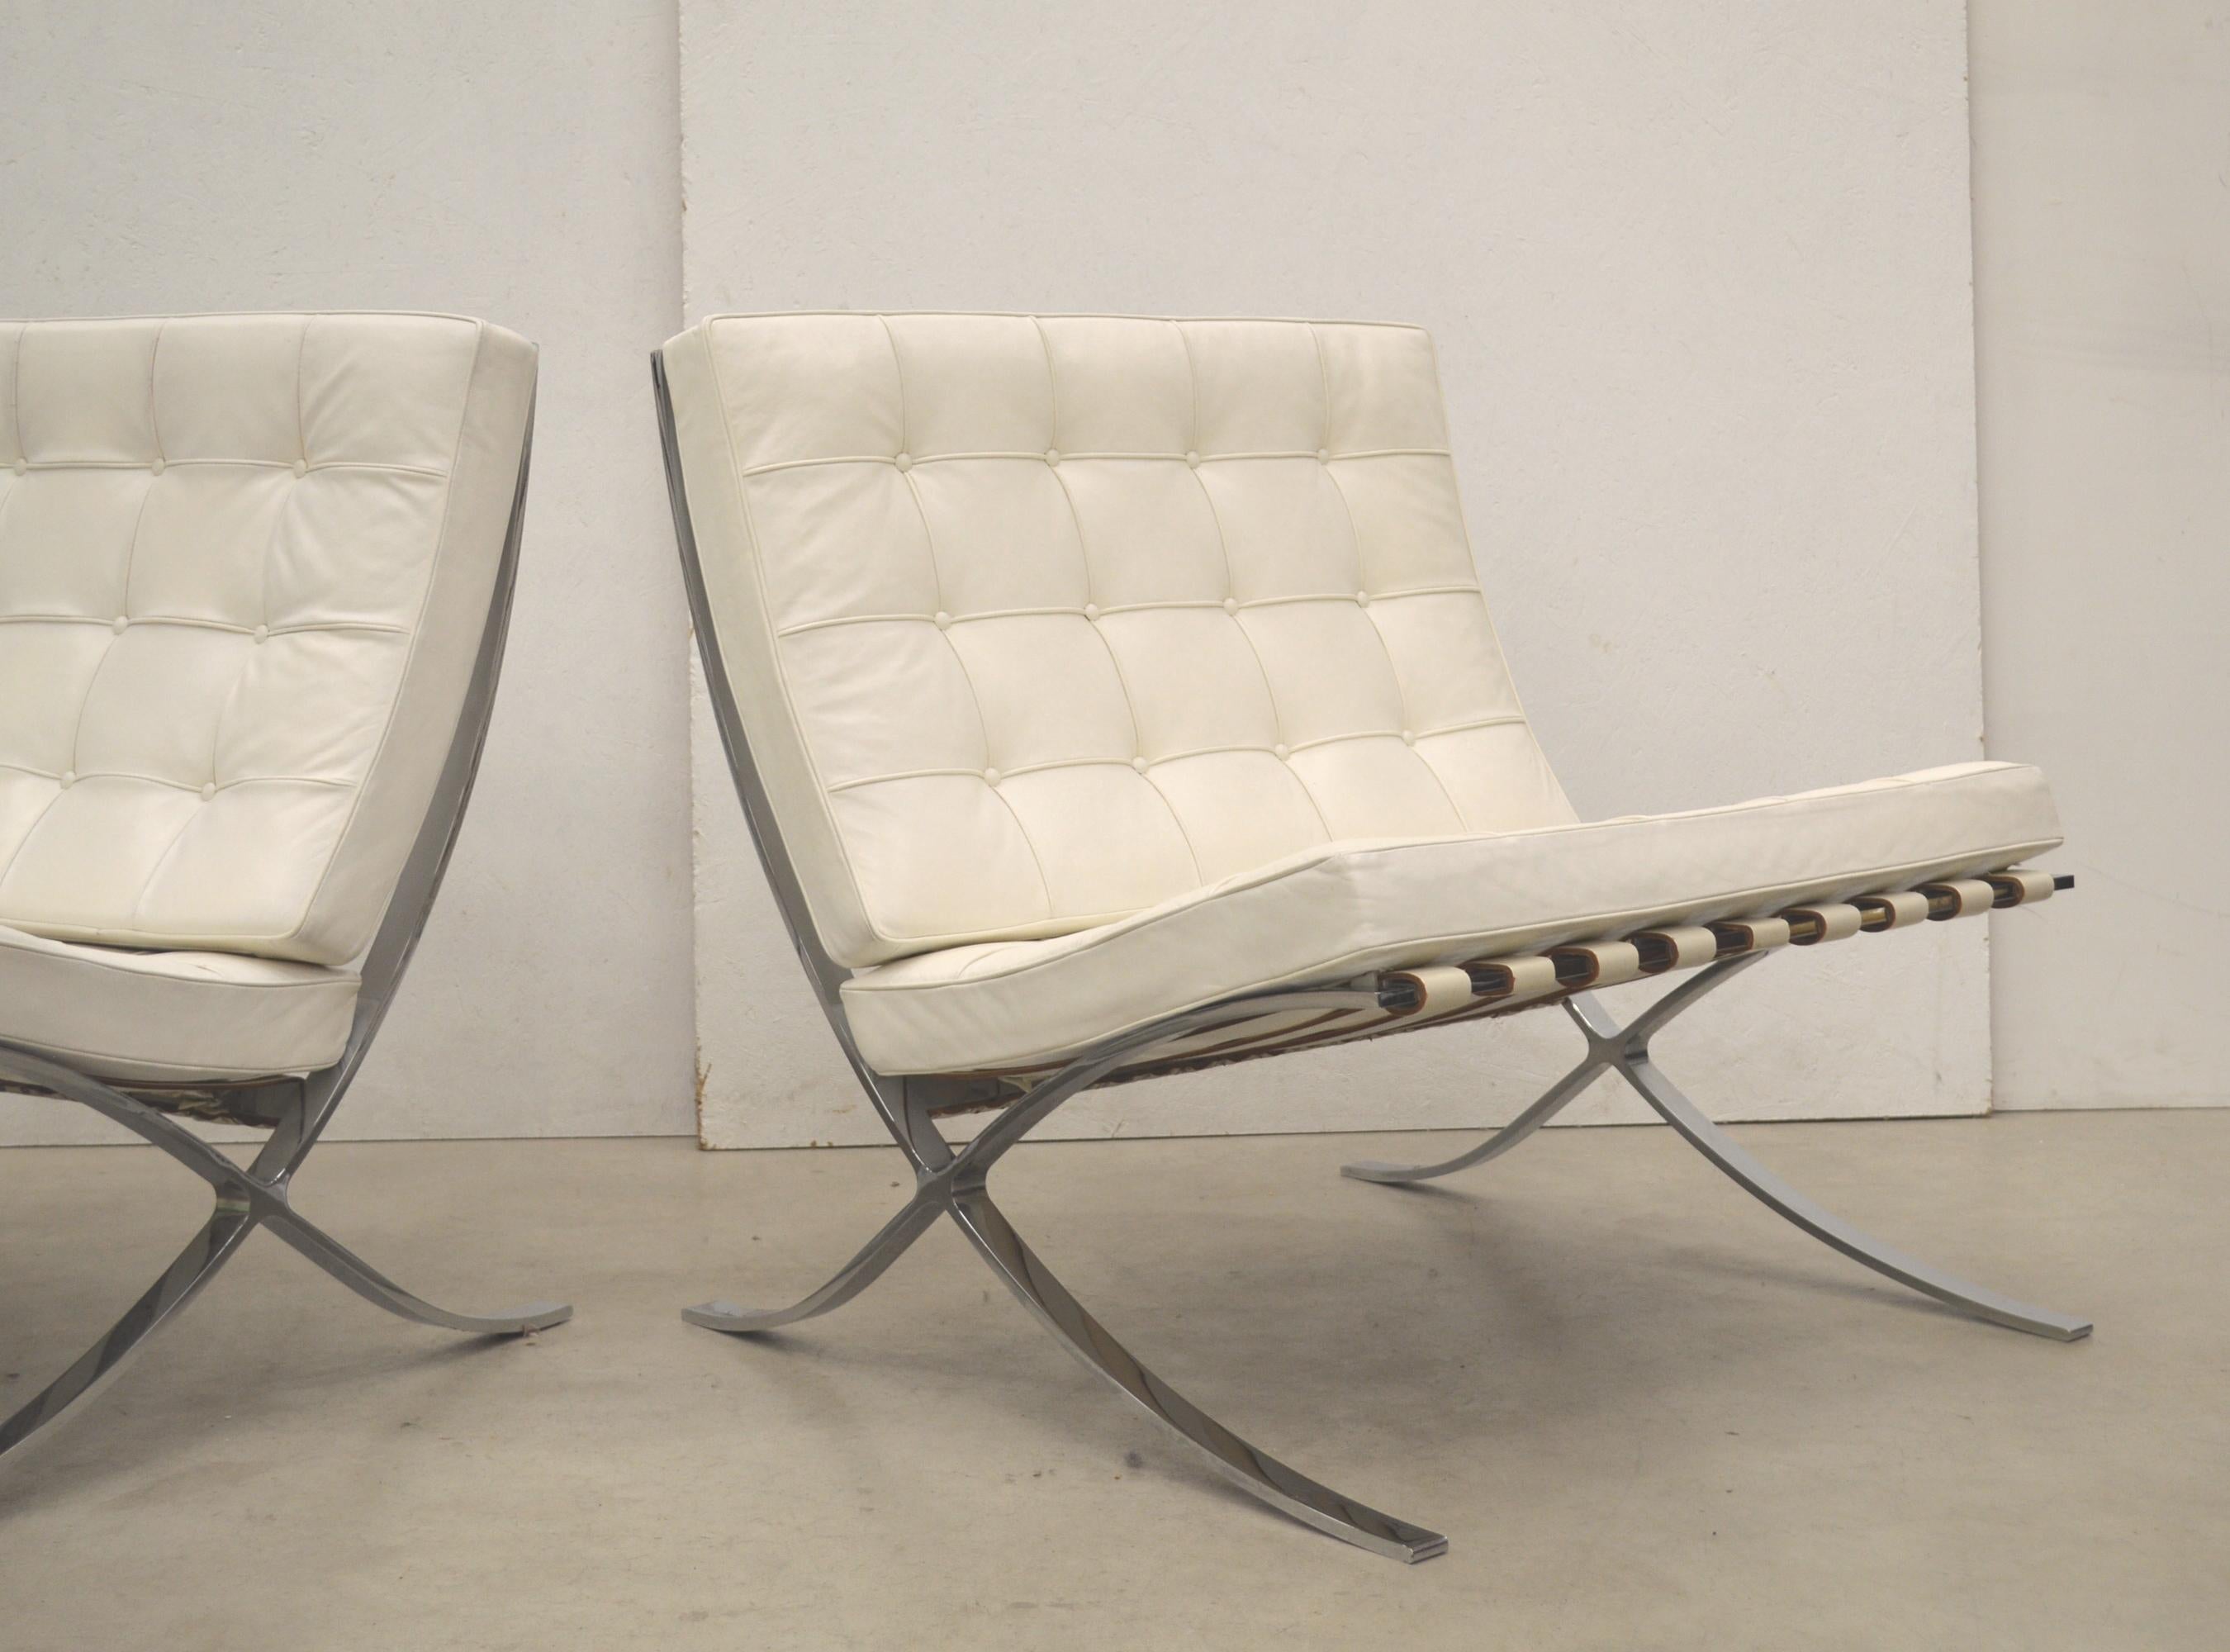 These very rare Barcelona chairs were designed by Mies van der Rohe in 1929 and produced by Knoll in 1981 for the 30th anniversary of Knoll International. 

With this backround, Knoll produced in 1981 a very rare limited edition of only 100